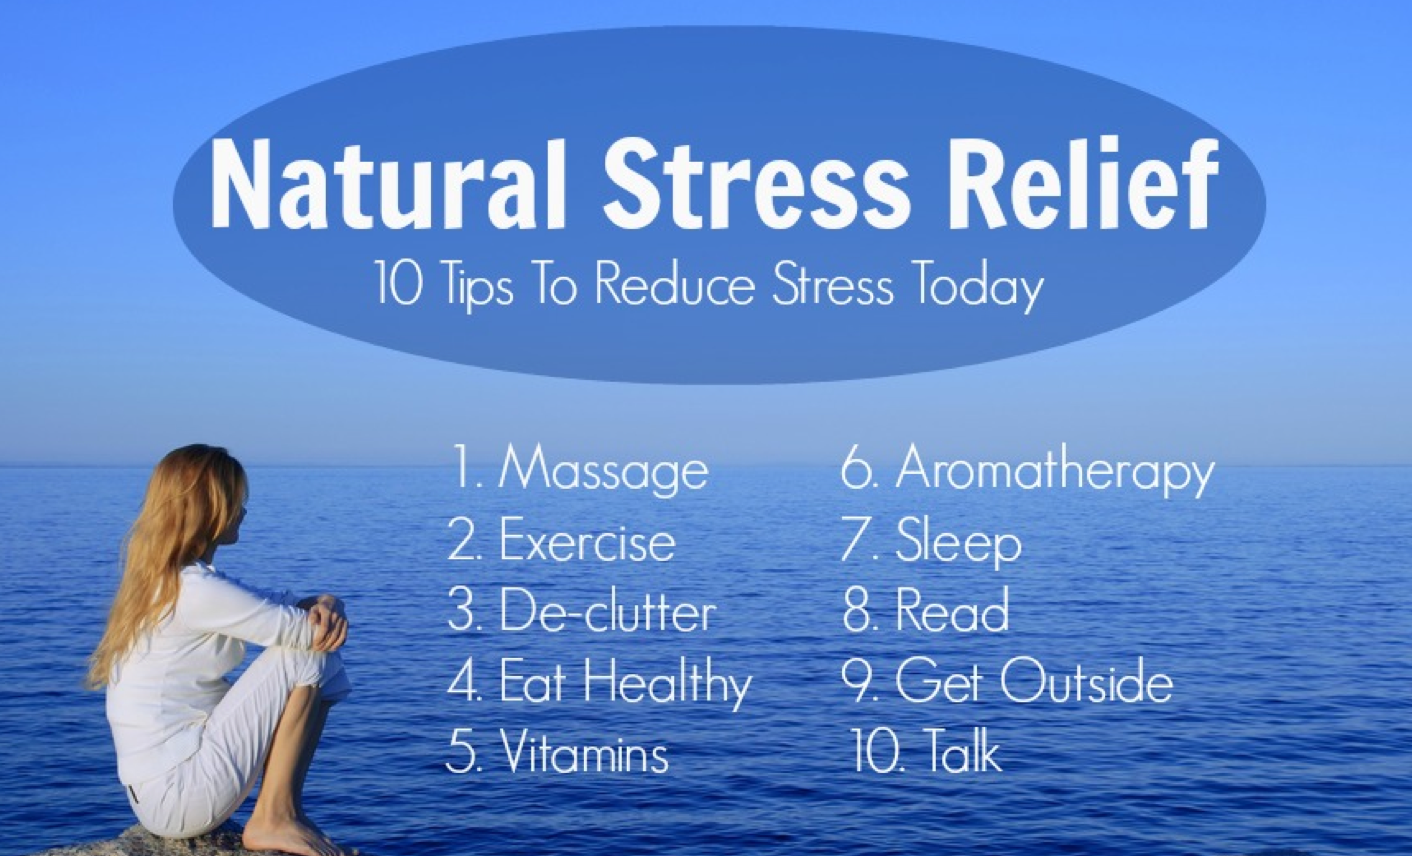 6 Natural Ingredients for Easy Stress Relief